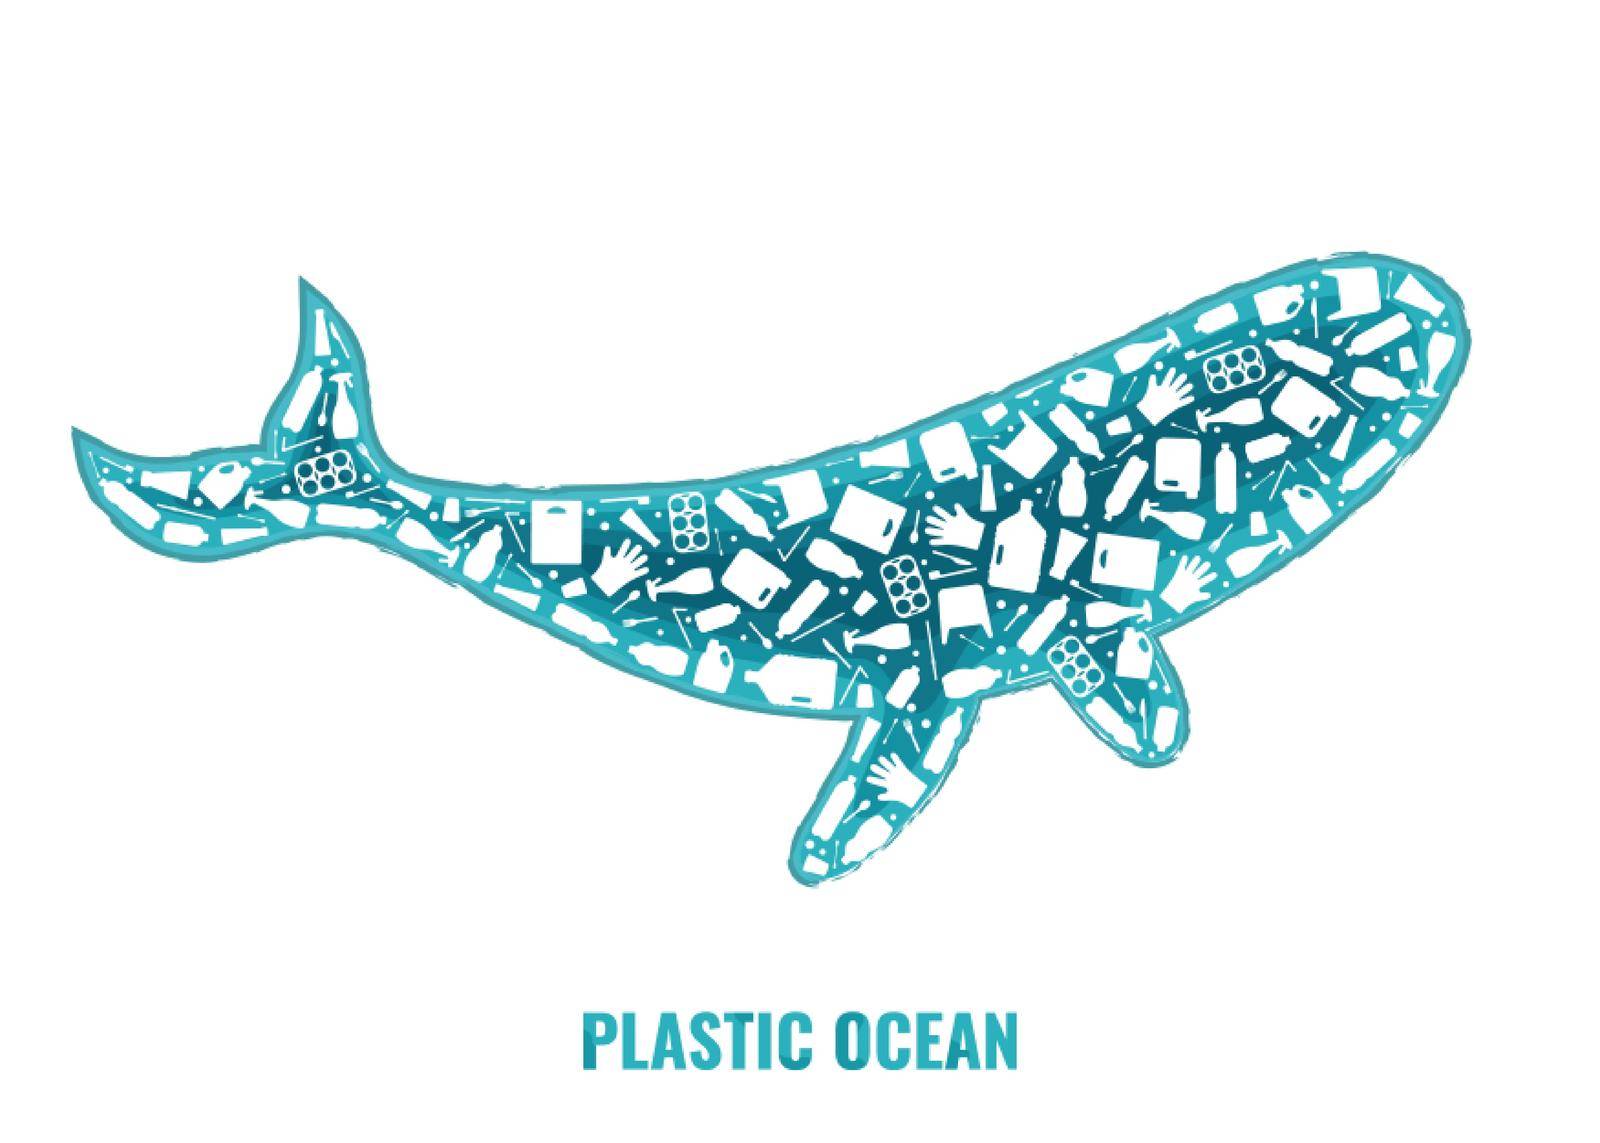 Plastic waste ocean environment problem concept vector llustration. Whale marine mammal silhouette filled with plastic garbage flat icons. Microplastic pollution problem, single use plastic crisis.